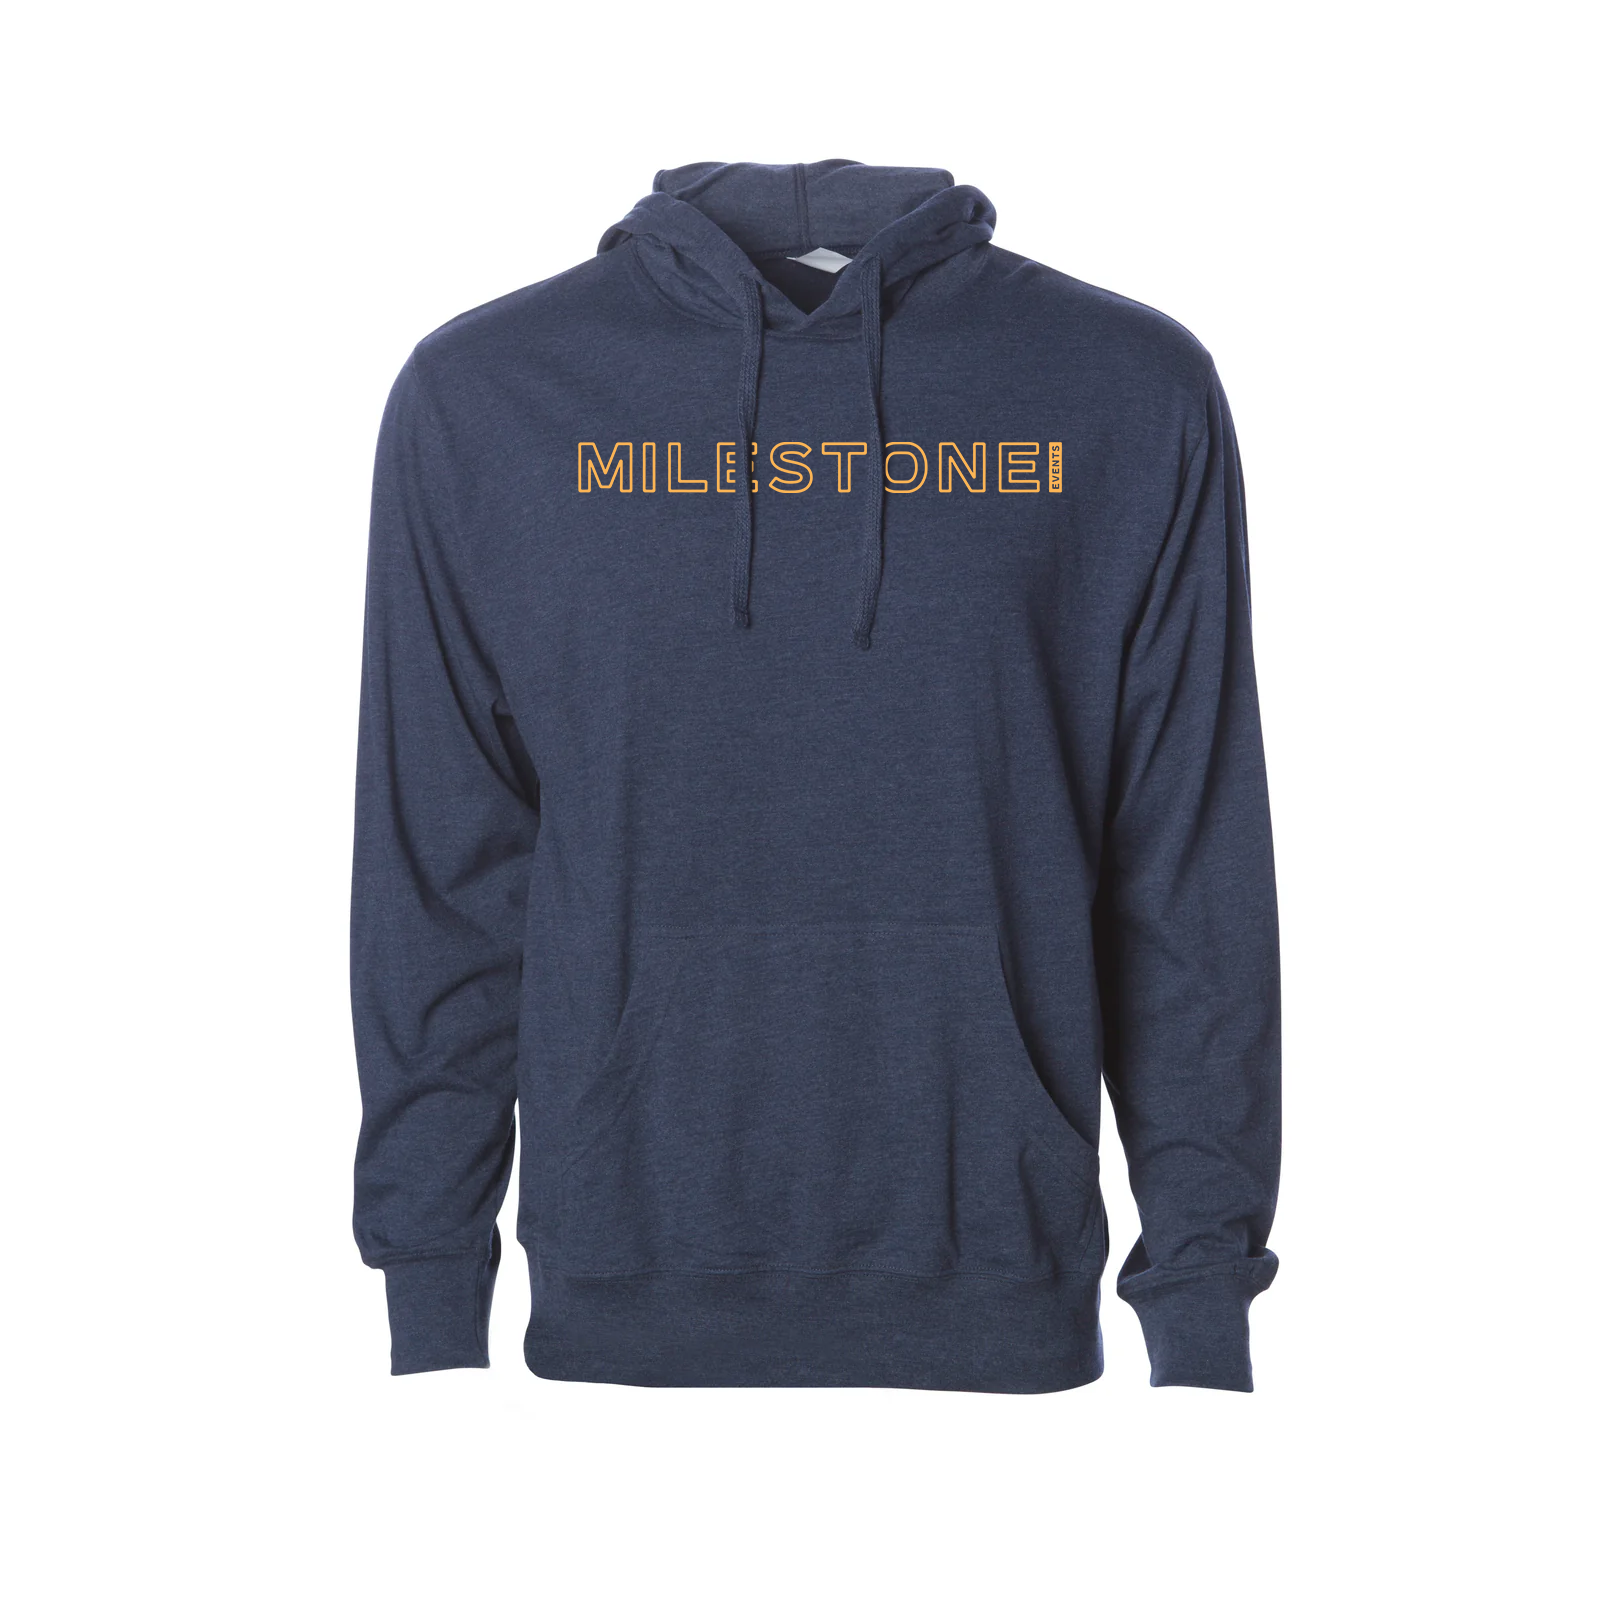 Independent Trading Co. SS150J - Lightweight Jersey Hooded Pullover